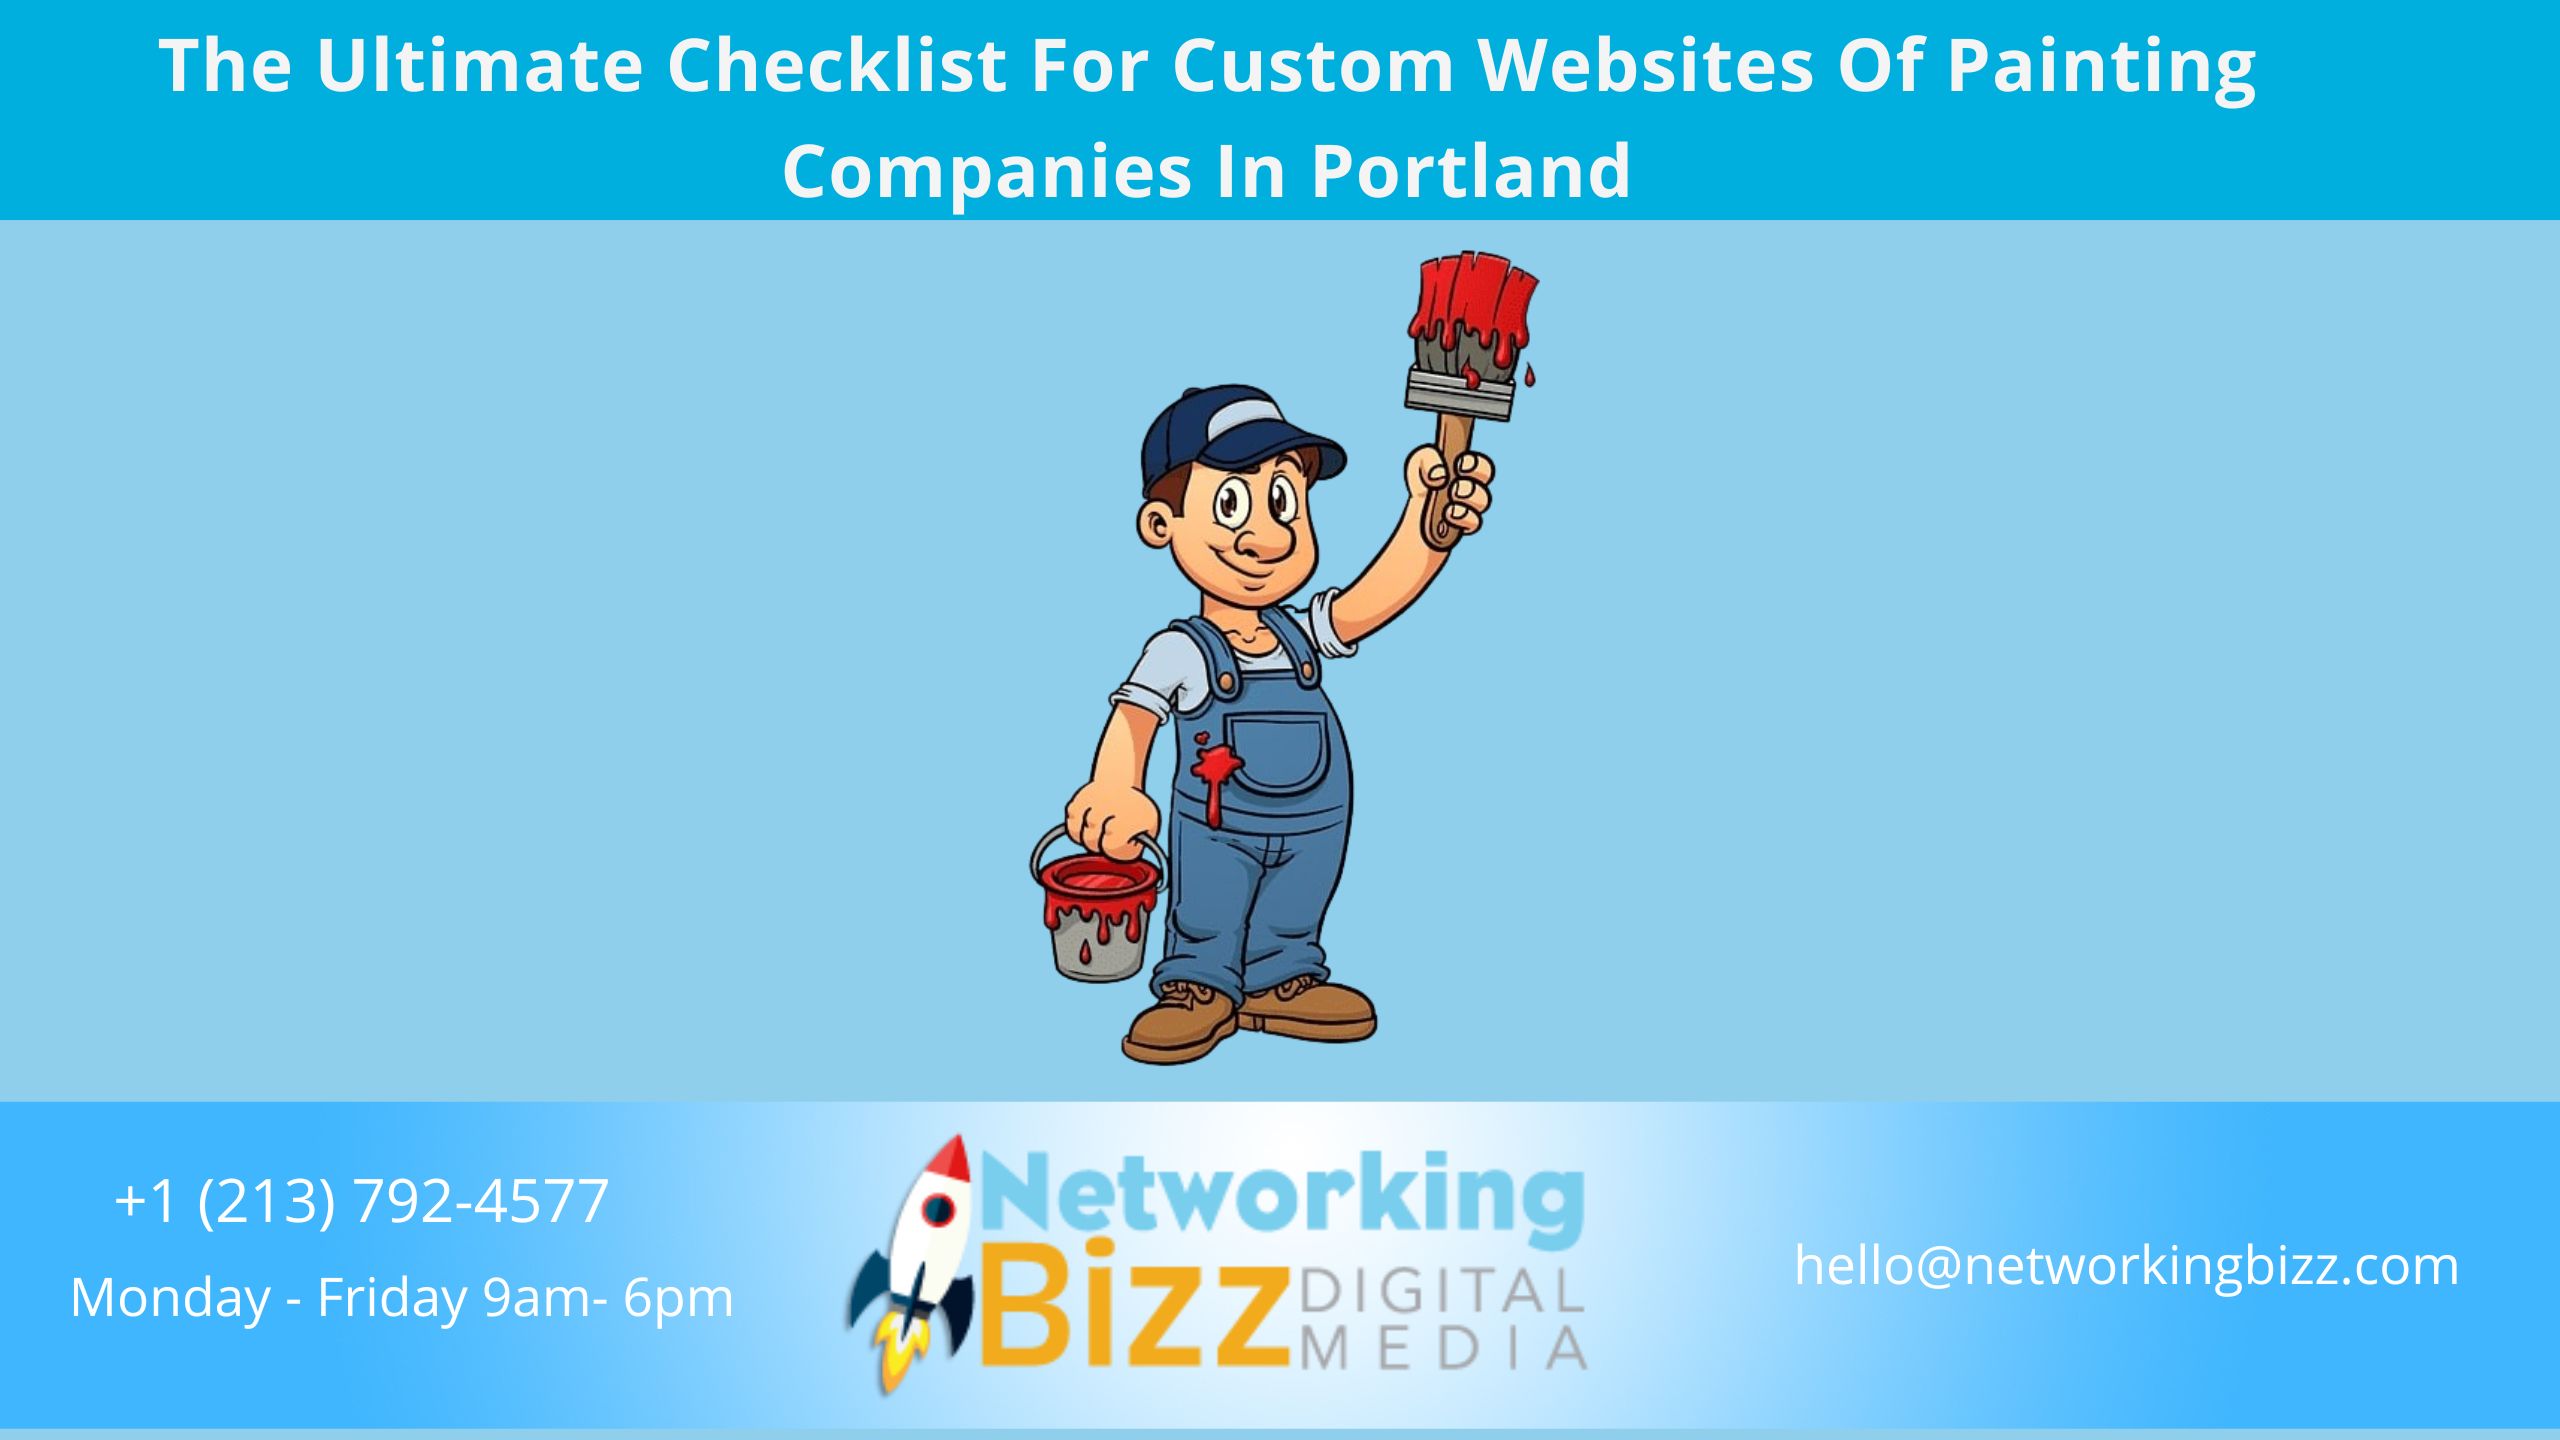 The Ultimate Checklist For Custom Websites Of Painting Companies In Portland